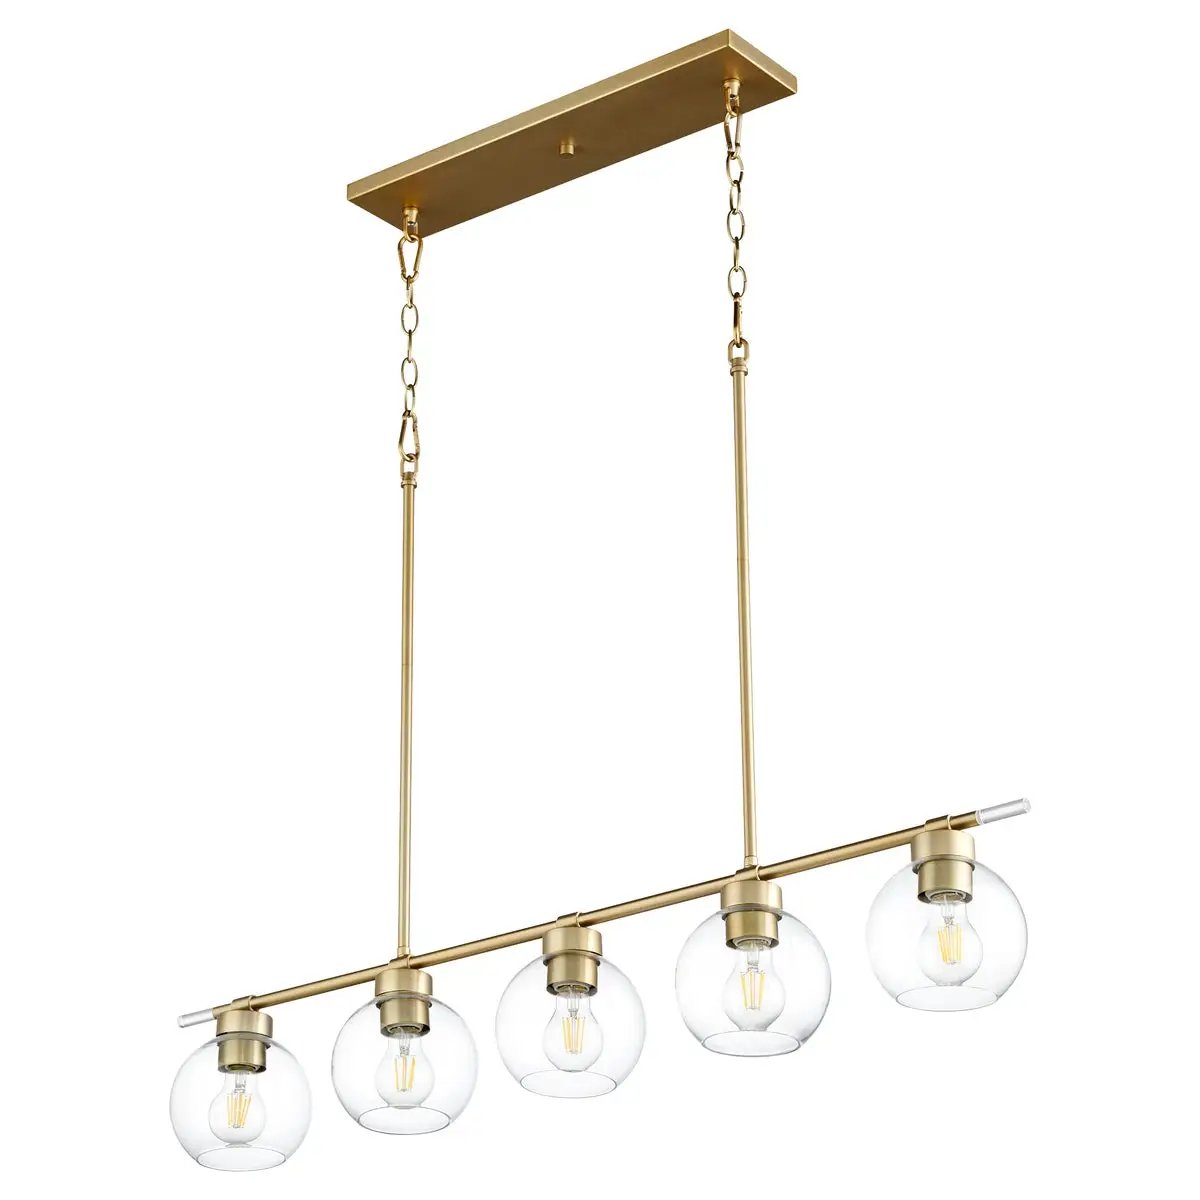 Transitional Linear Chandelier with clear glass globes and aged brass finish, 5 bulbs, 100W, UL Listed, Damp Location, 6"W x 7.25"H x 41"L.